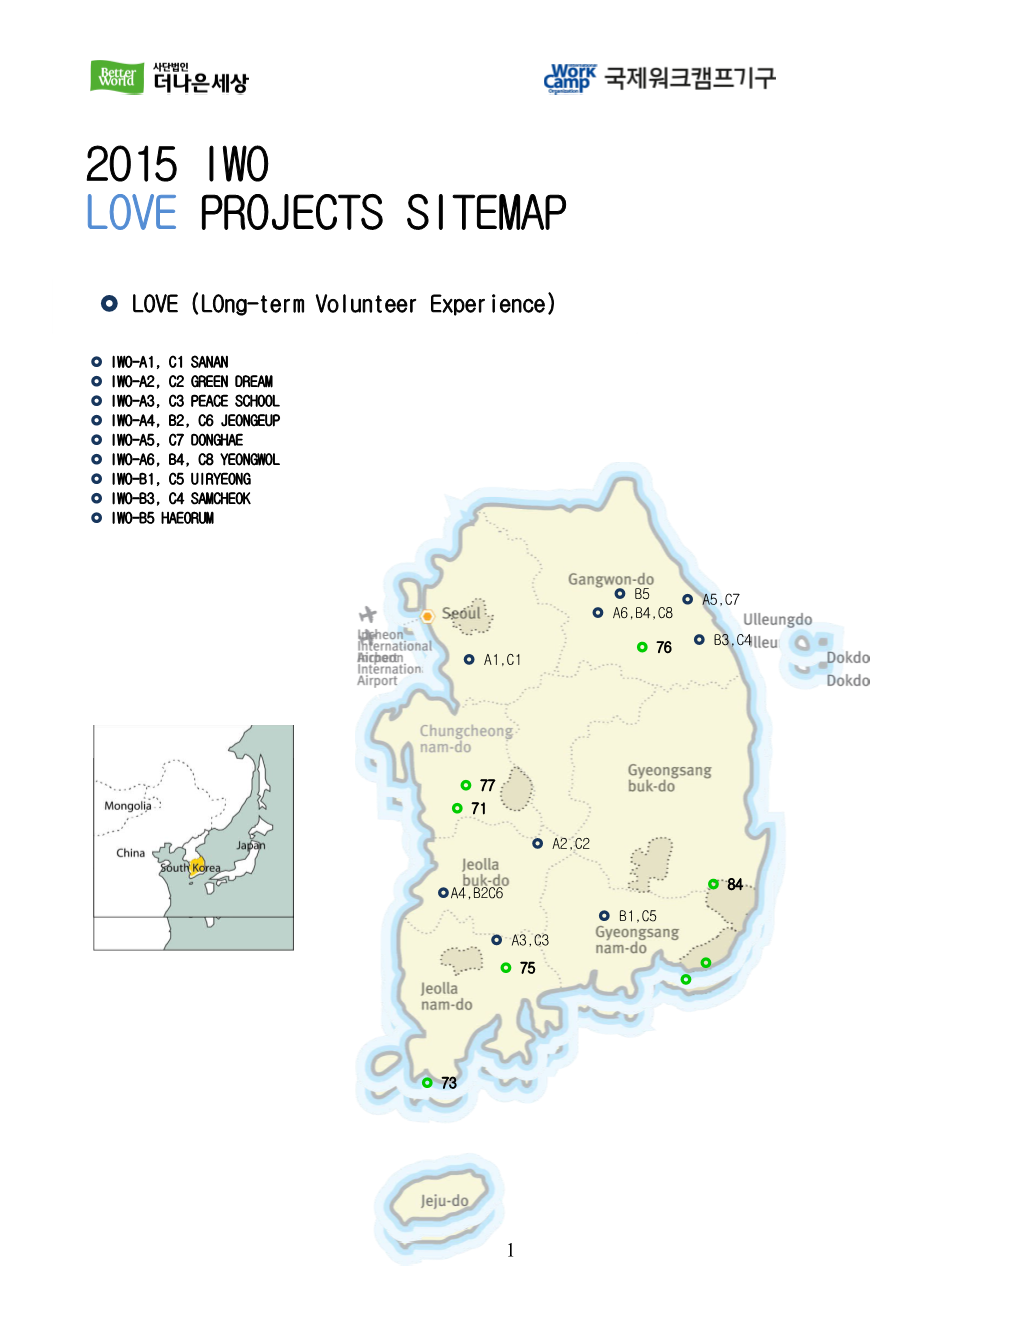 2004 International Volunteer Projects in KOREA, Philippine and India